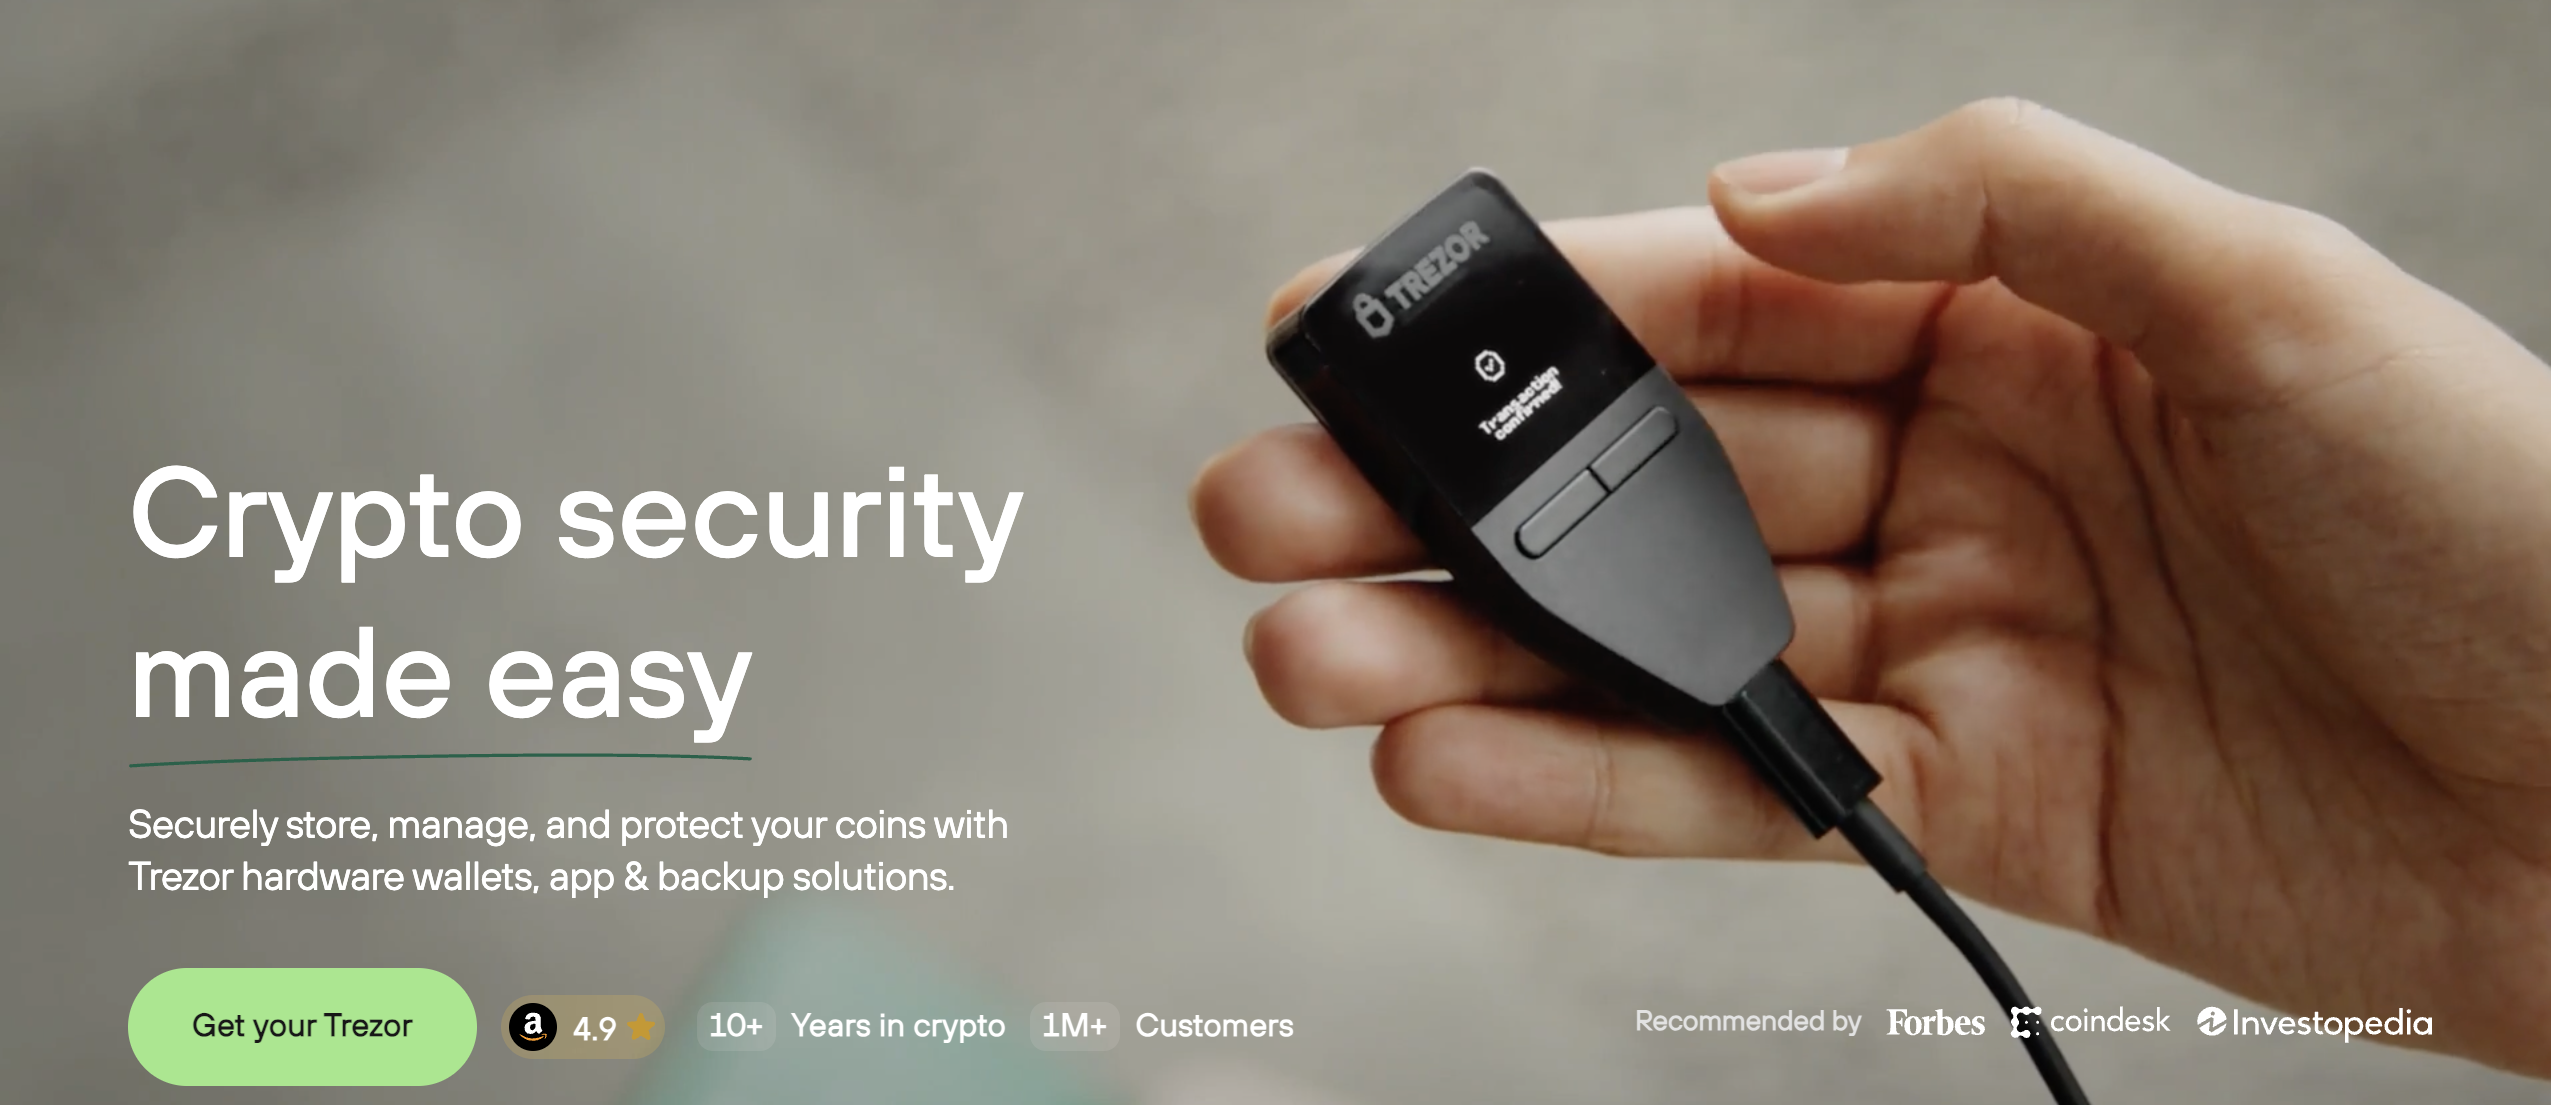 Trezor Model T - Advanced Crypto Hardware Wallet with LCD Touchscreen,  Protecting Bitcoin & Over 8000 Coins for Maximum Security